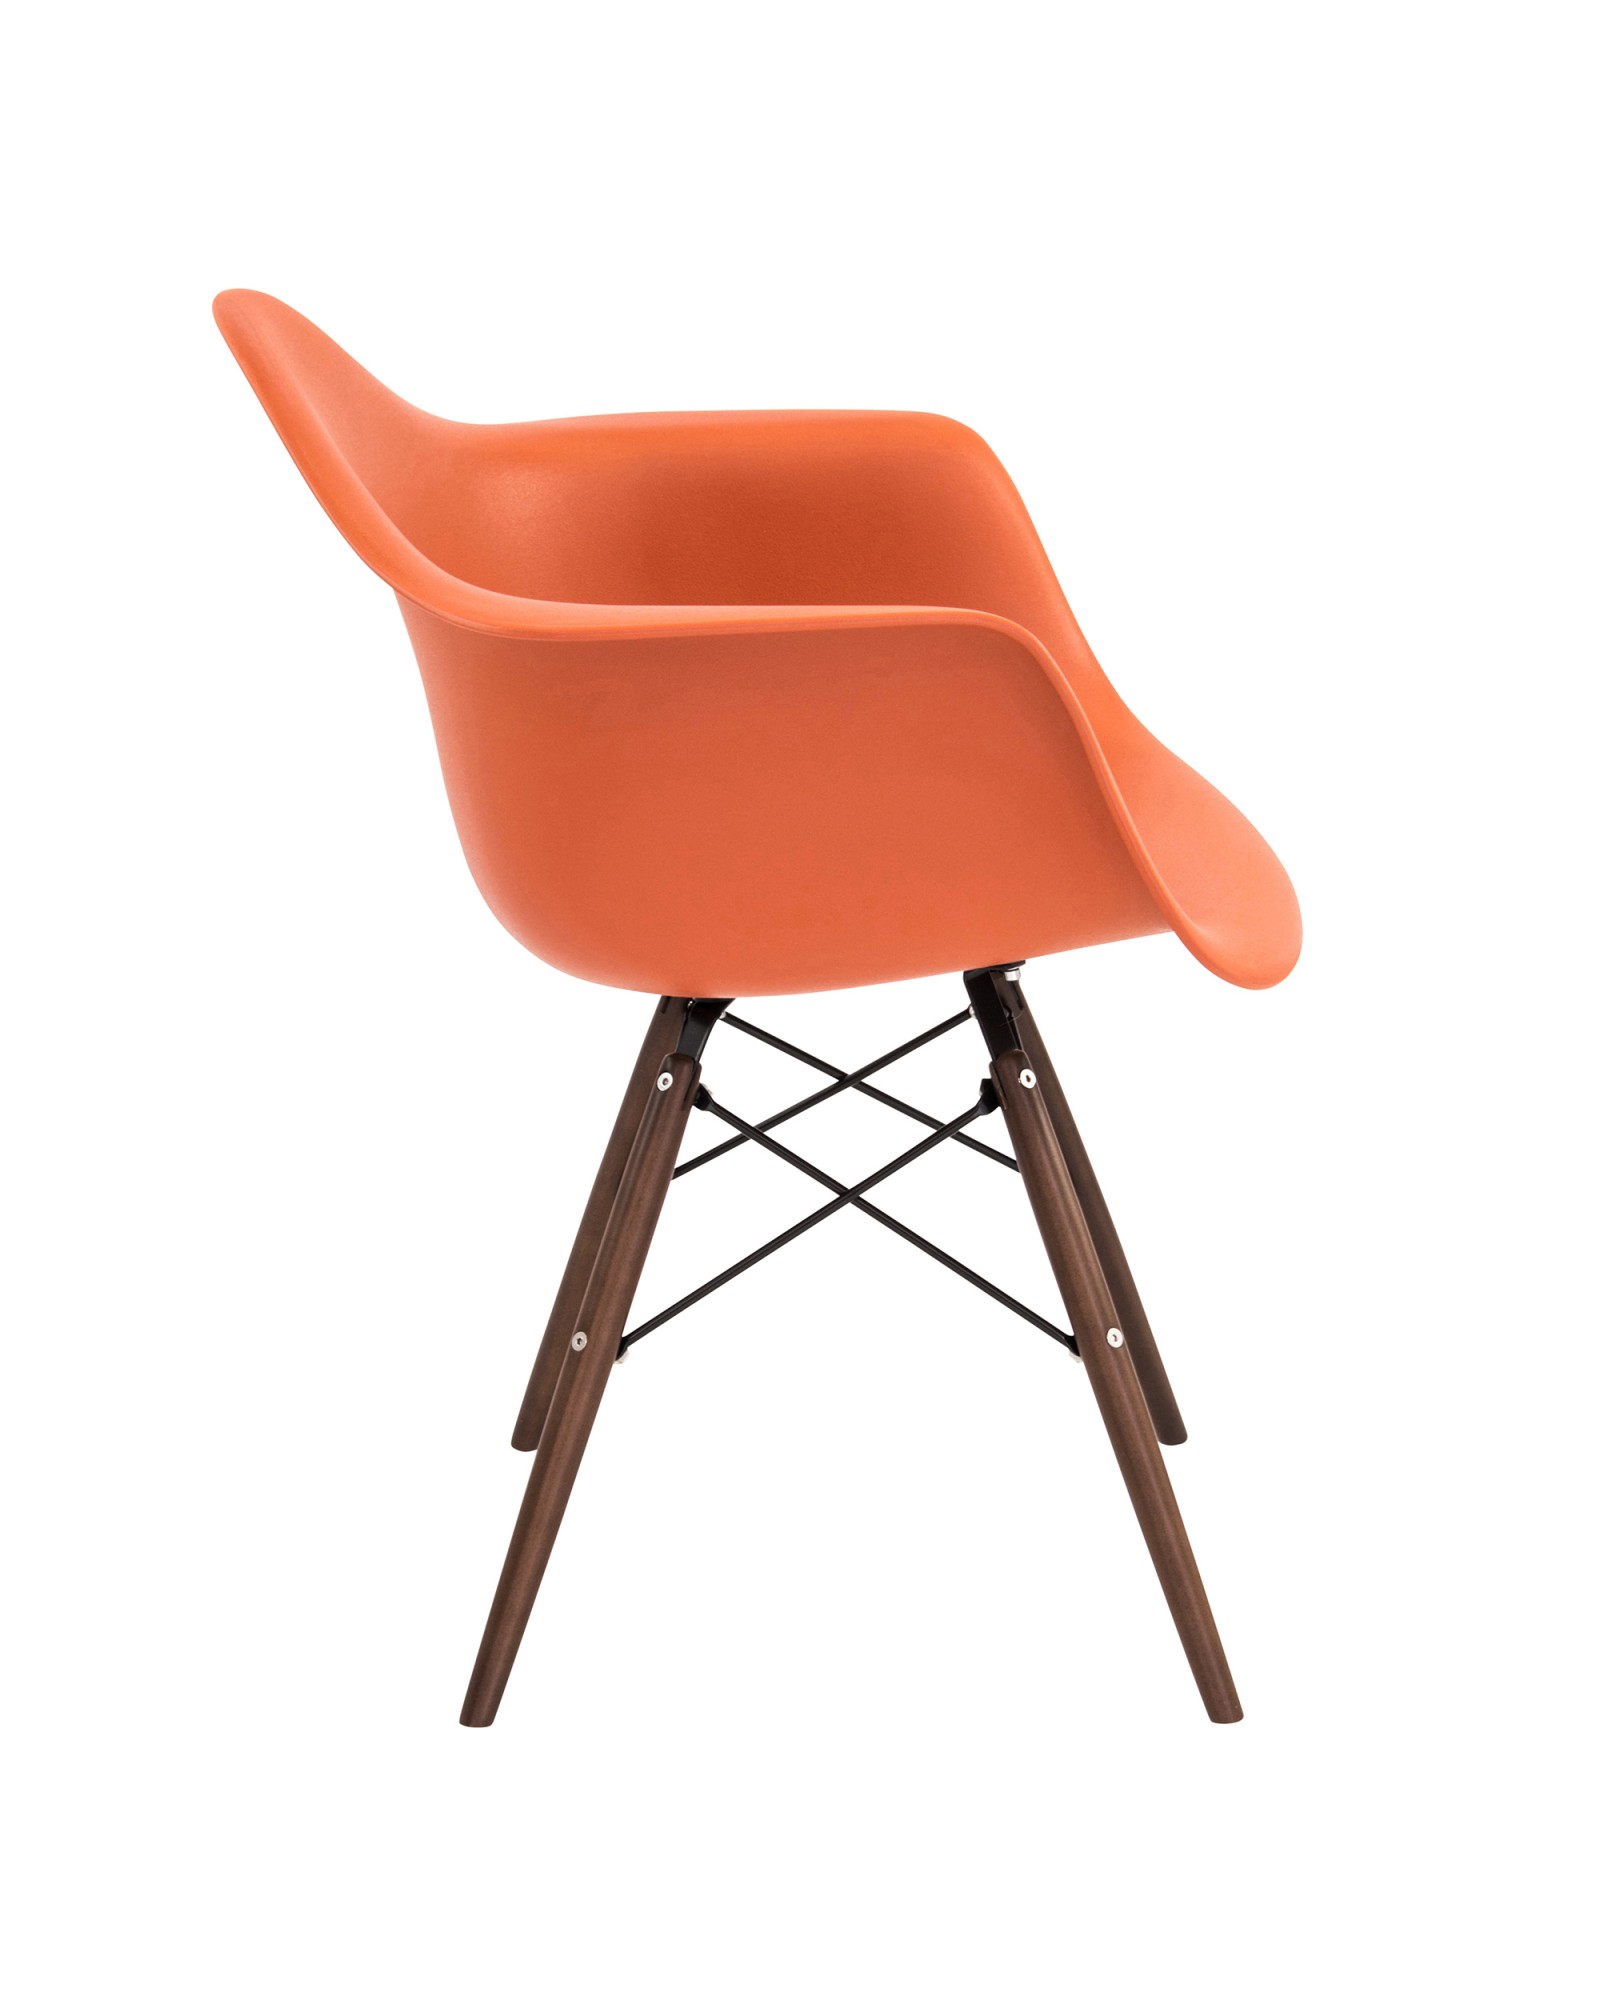 Neo Flair Mid-Century Modern Chair in Orange and Espresso - Set of 2